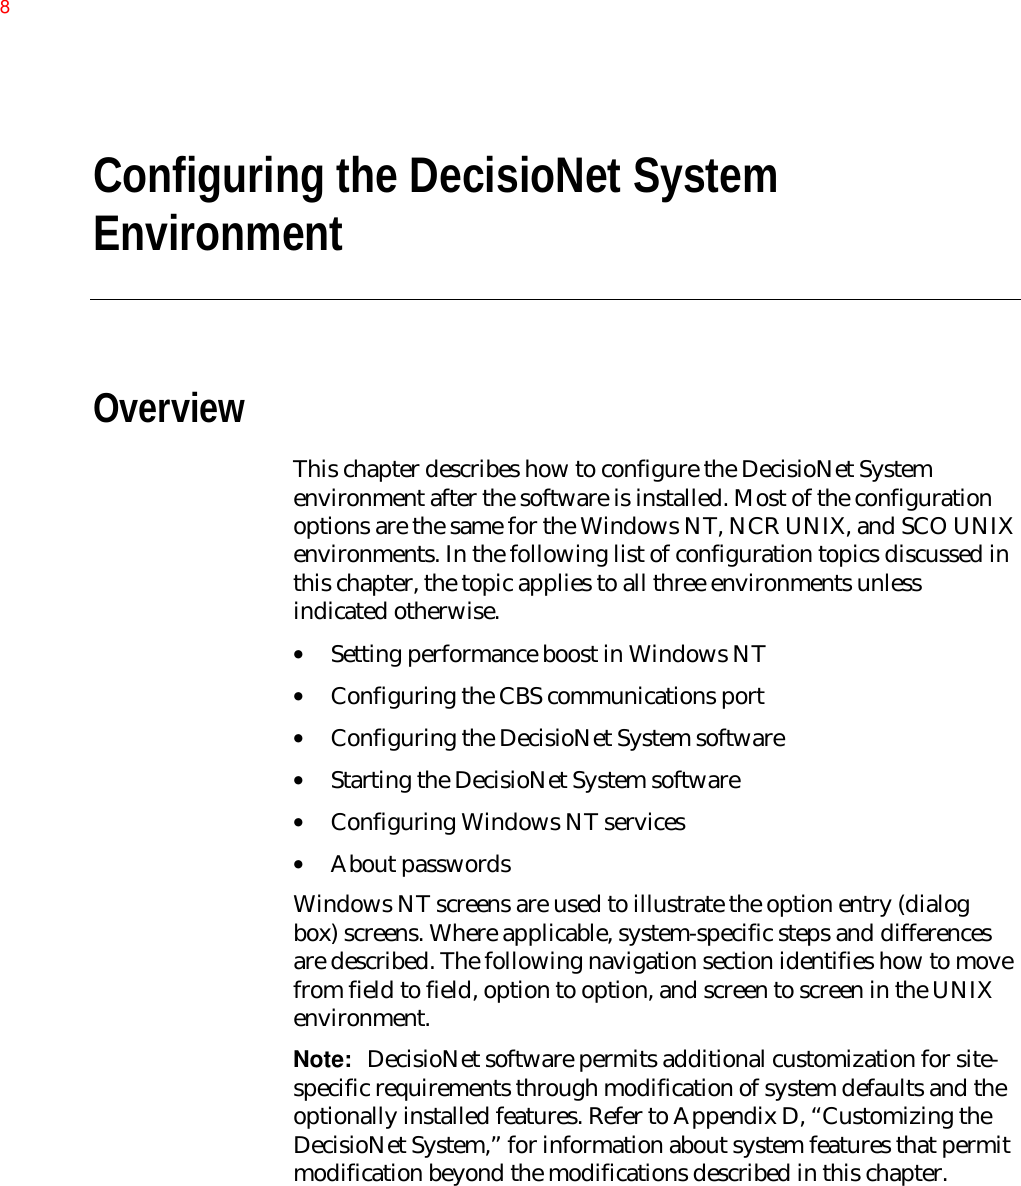 Configuring the DecisioNet SystemEnvironmentOverviewThis chapter describes how to configure the DecisioNet Systemenvironment after the software is installed. Most of the configurationoptions are the same for the Windows NT, NCR UNIX, and SCO UNIXenvironments. In the following list of configuration topics discussed inthis chapter, the topic applies to all three environments unlessindicated otherwise.• Setting performance boost in Windows NT• Configuring the CBS communications port• Configuring the DecisioNet System software• Starting the DecisioNet System software• Configuring Windows NT services• About passwordsWindows NT screens are used to illustrate the option entry (dialogbox) screens. Where applicable, system-specific steps and differencesare described. The following navigation section identifies how to movefrom field to field, option to option, and screen to screen in the UNIXenvironment.Note:  DecisioNet software permits additional customization for site-specific requirements through modification of system defaults and theoptionally installed features. Refer to Appendix D, “Customizing theDecisioNet System,” for information about system features that permitmodification beyond the modifications described in this chapter.8